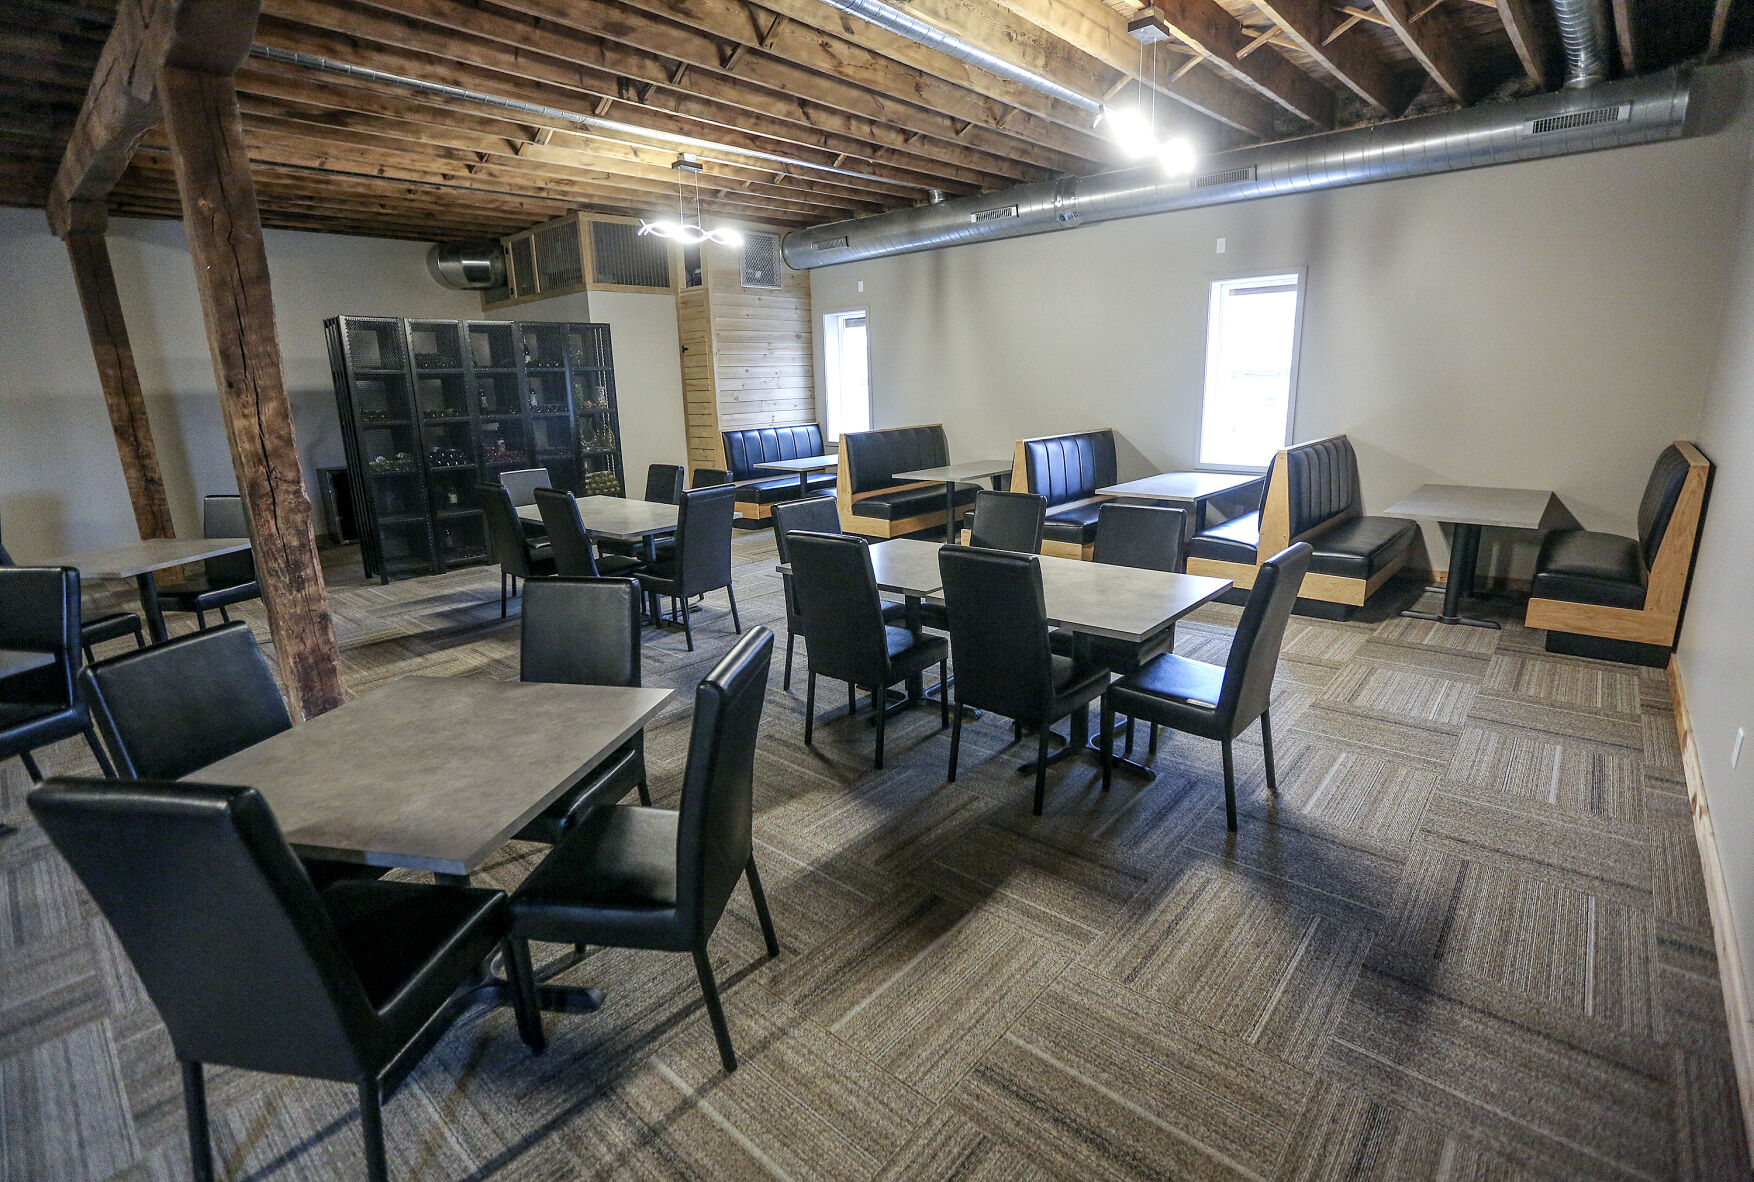 Inside of the new dining area at Fuse located in Dyersville, Iowa on Thursday, Feb. 23, 2023.    PHOTO CREDIT: Dave Kettering